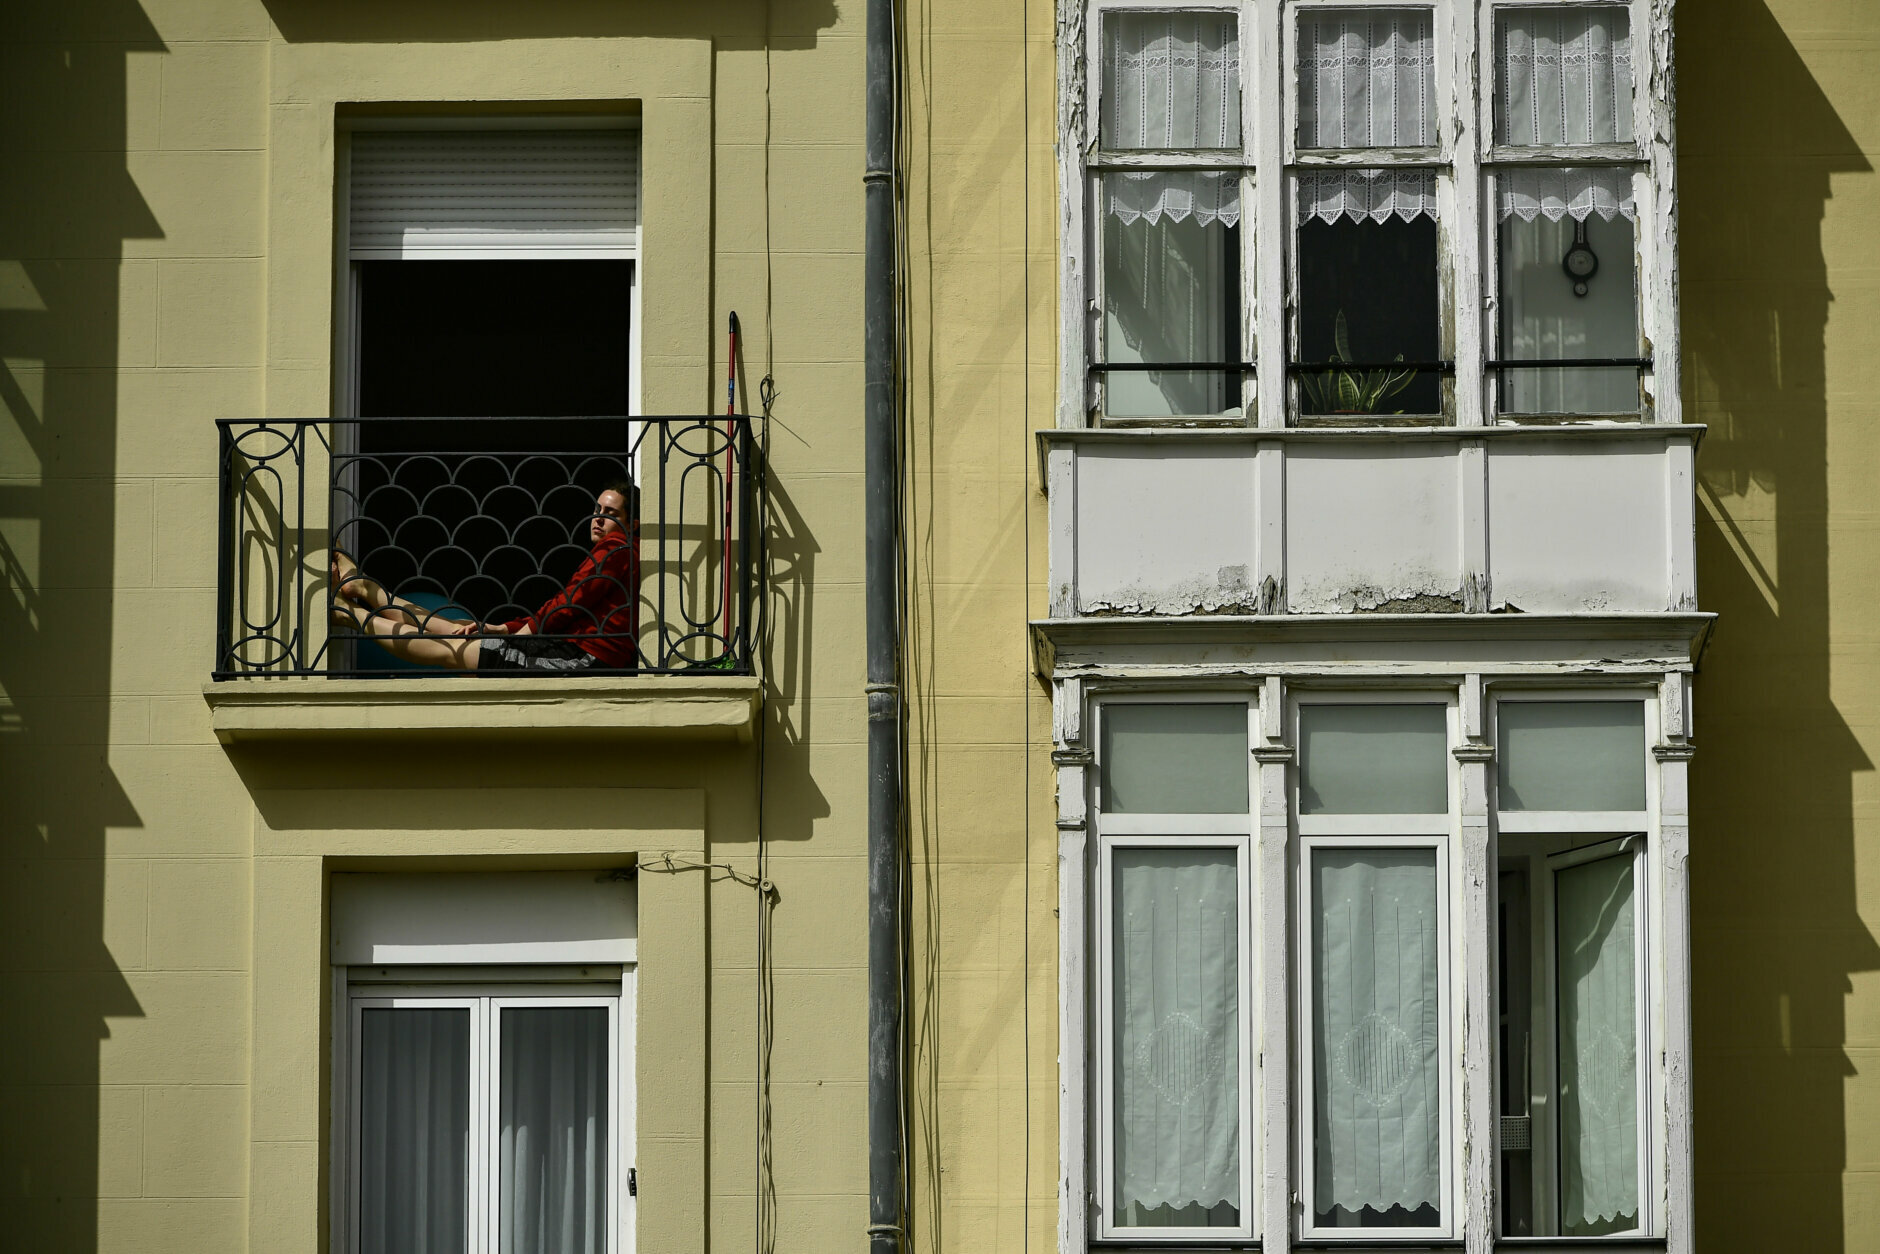 A woman rests on the balcony of a building as people stay in their houses to prevent the spread of coronavirus,, in Vitoria, northern Spain, Thursday, March 19, 2020. Spain will mobilize 200 billion euros or the equivalent to one fifth of the country's annual output in loans, credit guarantees and subsidies for workers and vulnerable citizens, Prime Minister Pedro Sanchez announced Tuesday. For most people, the new coronavirus causes only mild or moderate symptoms. For some, it can cause more severe illness, especially in older adults and people with existing health problems.